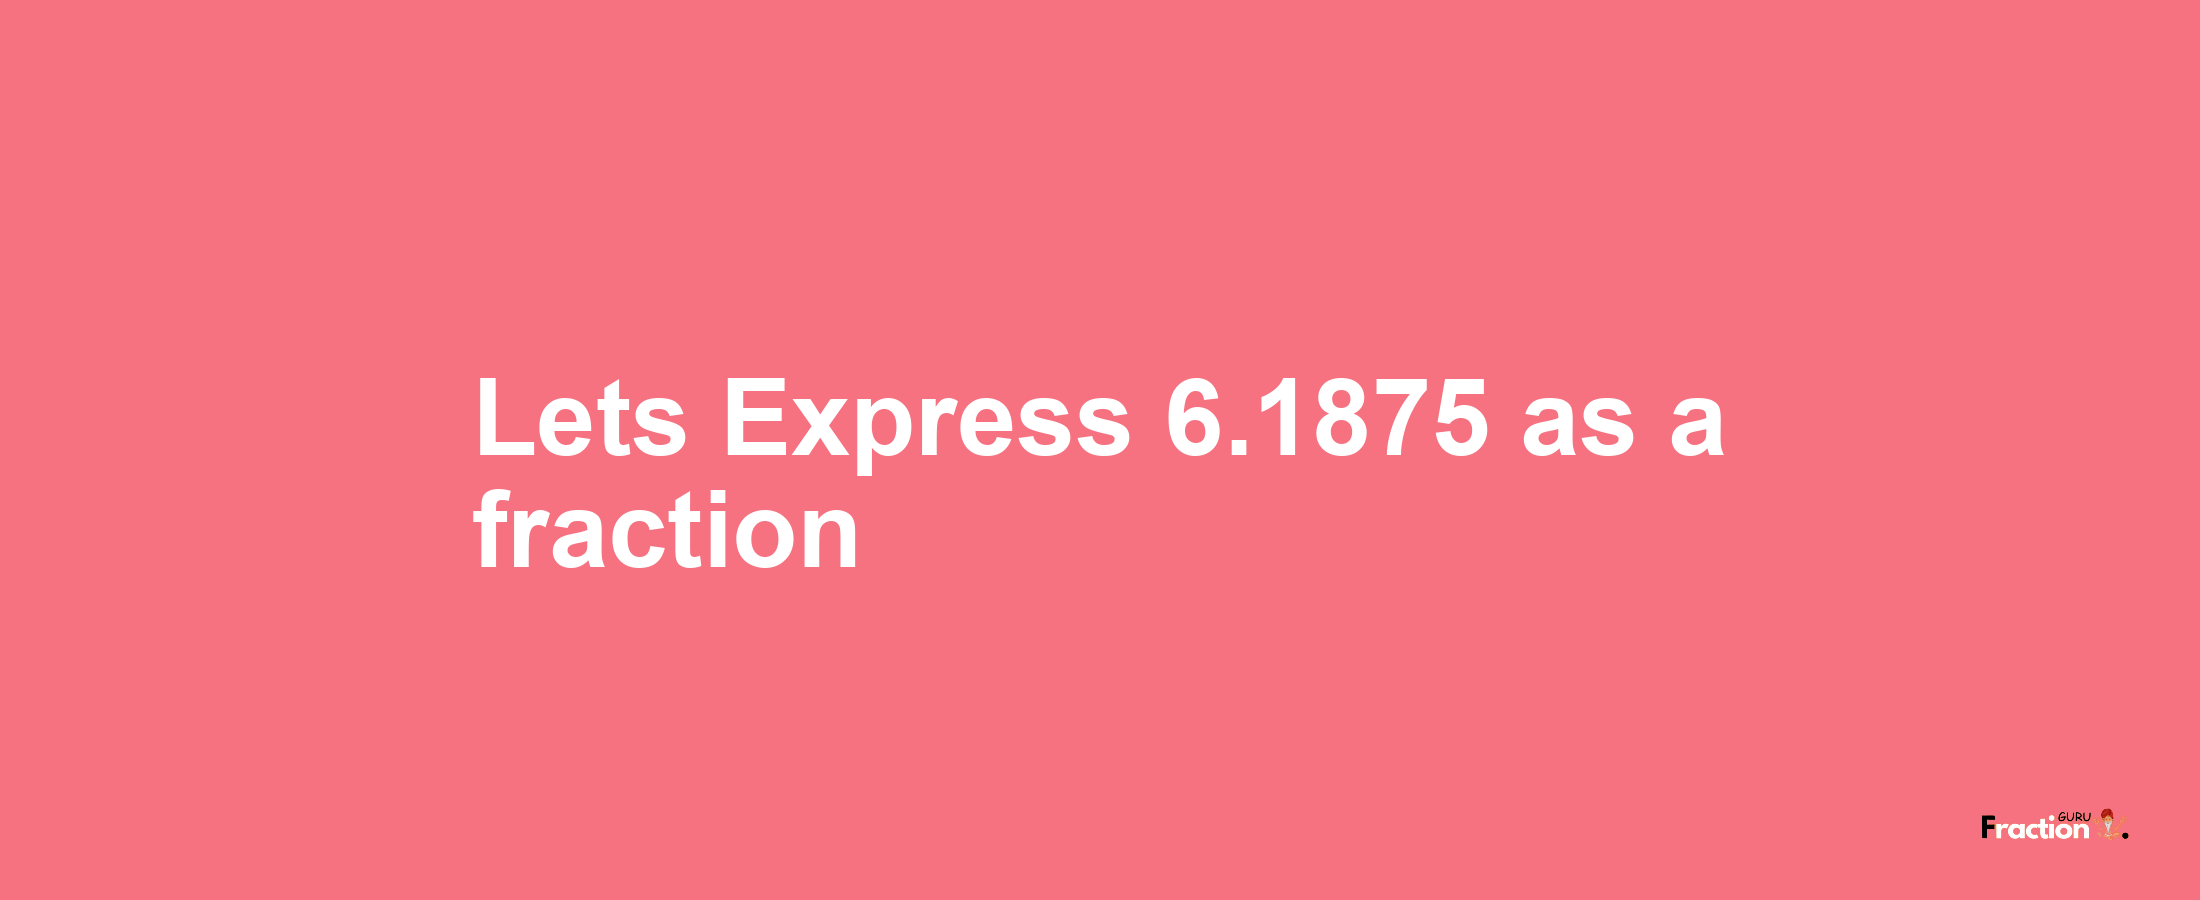 Lets Express 6.1875 as afraction